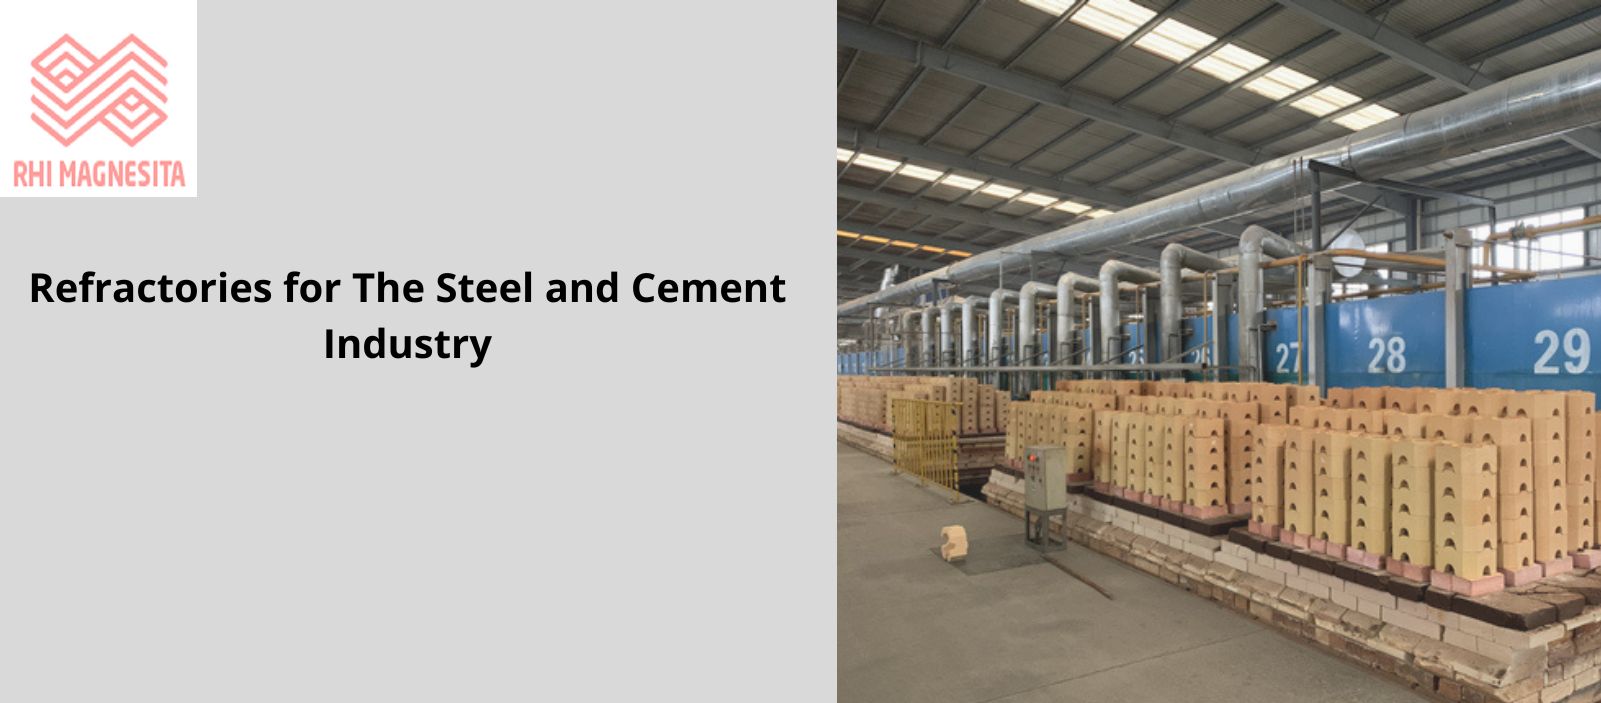 Refractories for the Steel and Cement Industry: The Key to India Infrastructure growth